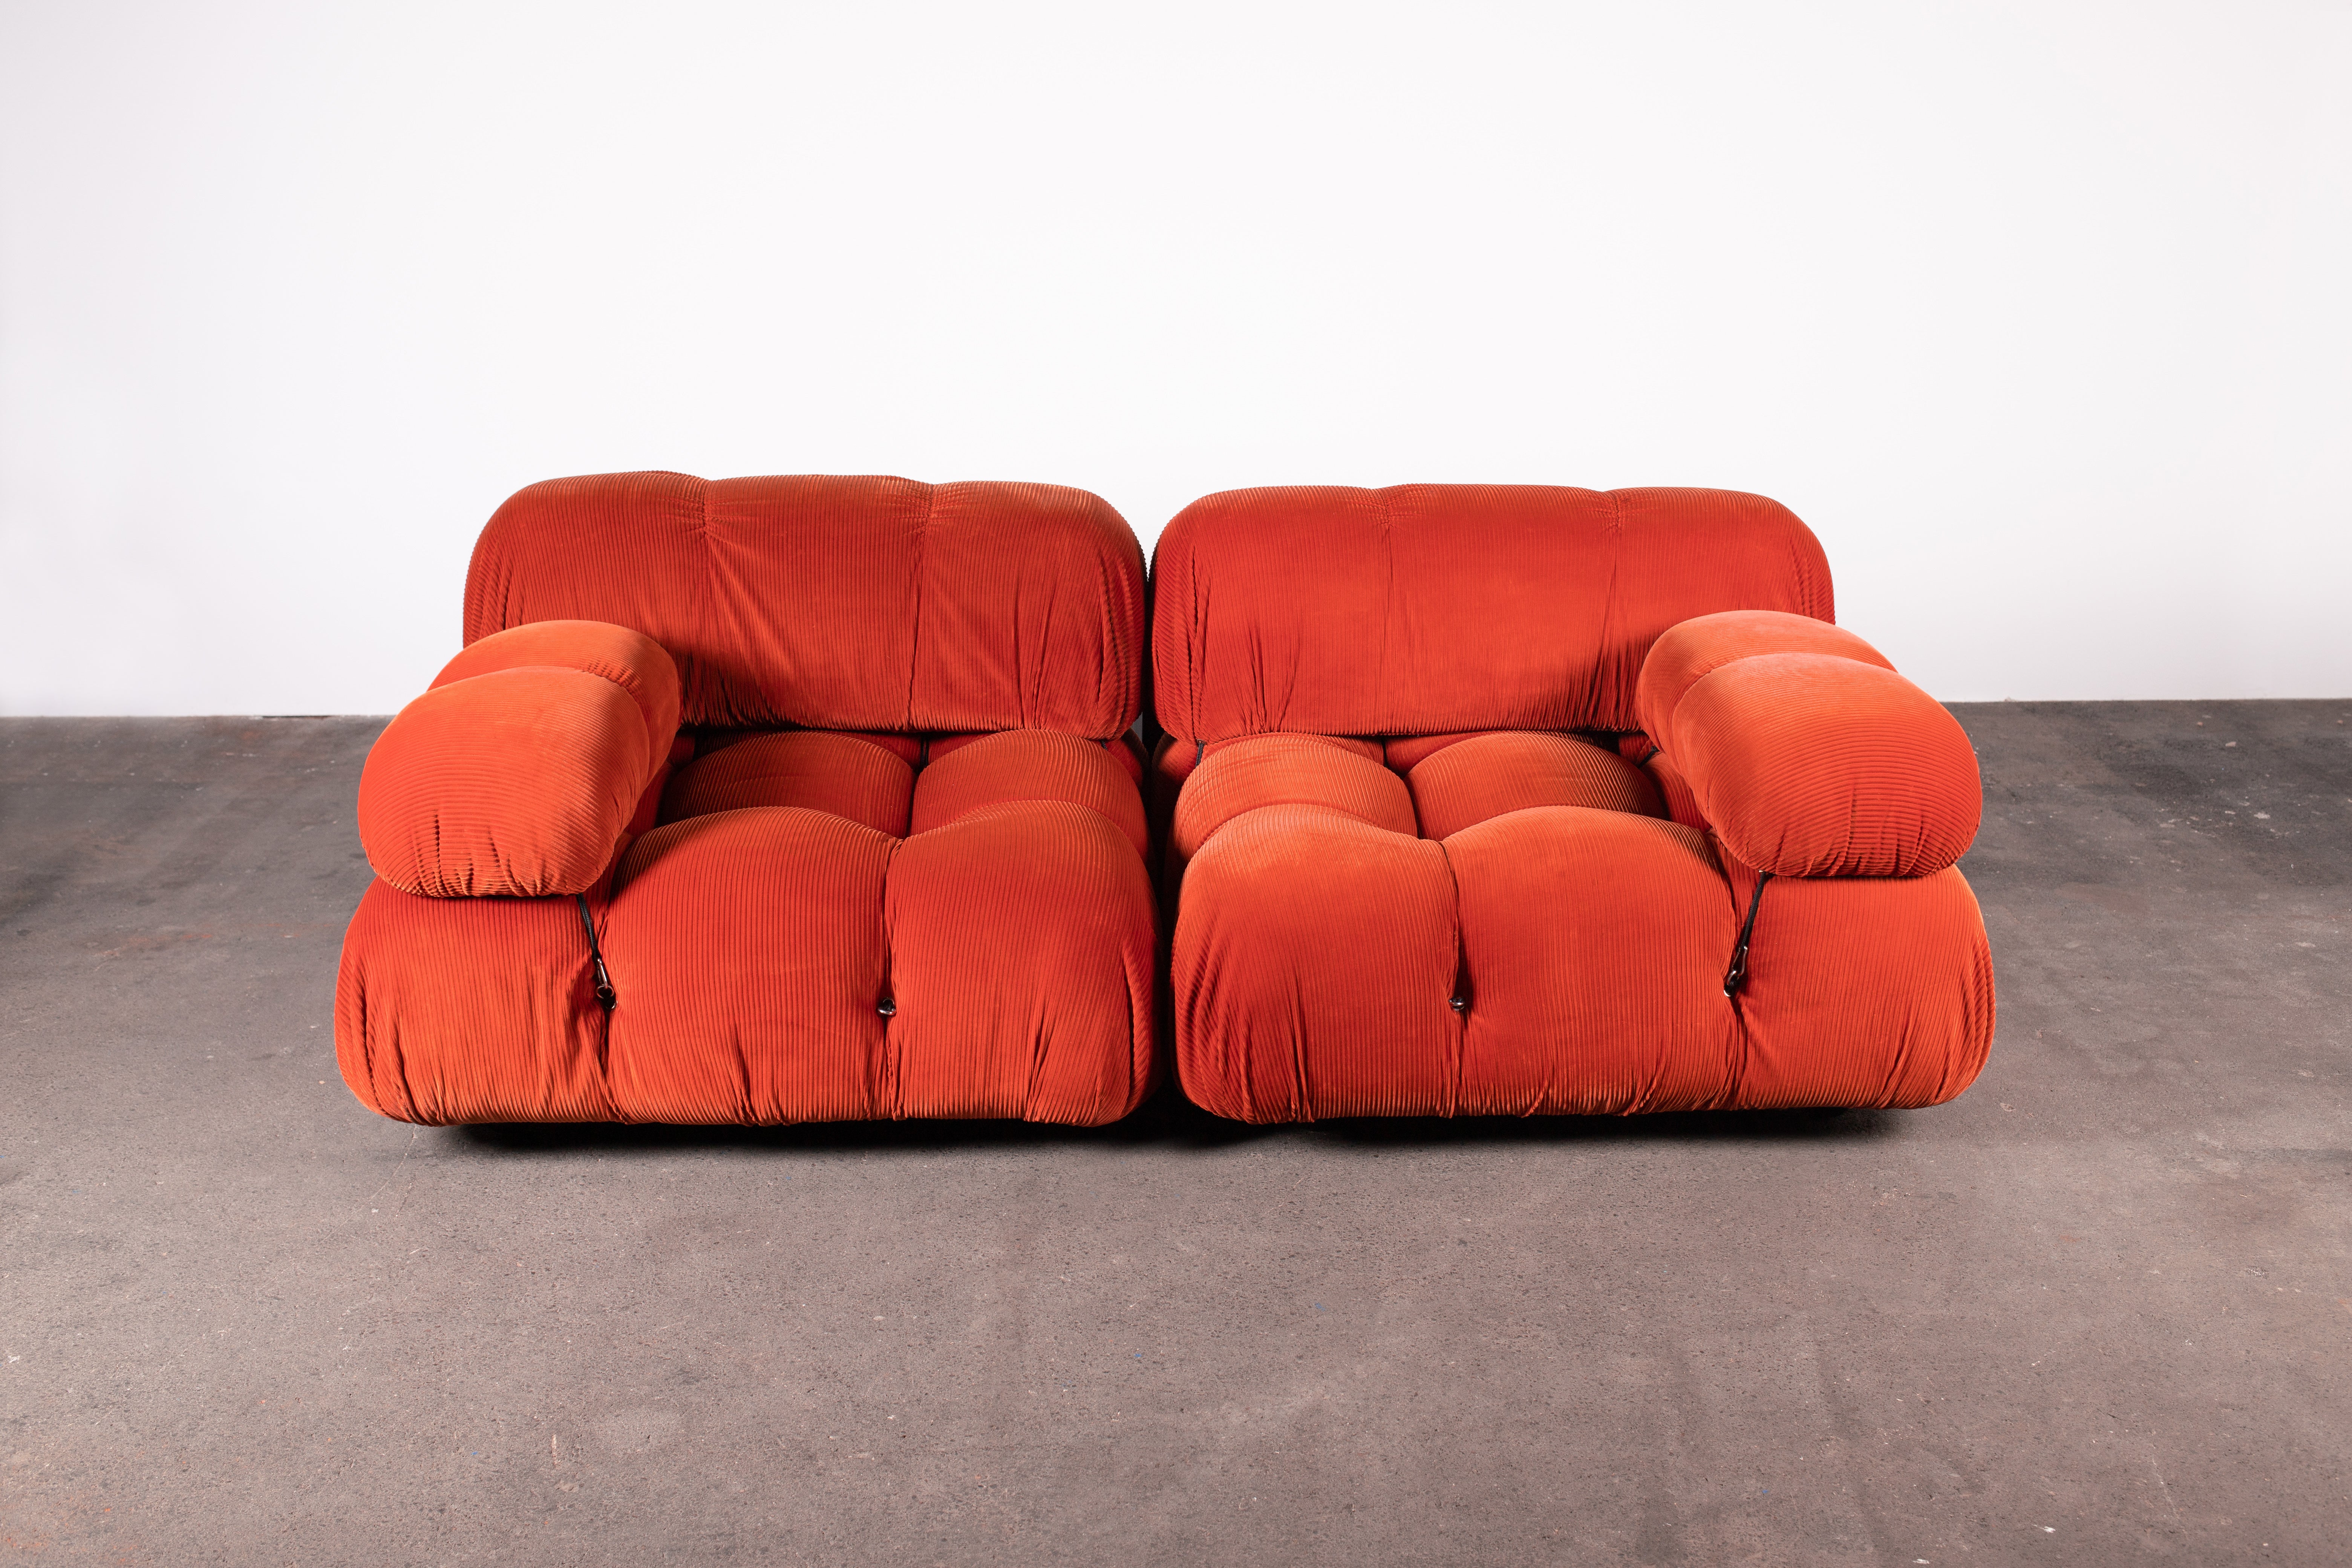 Original early B&B Italia Organic Modern 2-piece Camaleonda sectional sofa by Mario Bellini in orange cord fabric. Consists of two lounge chairs of the largest 3x3 format in the series. Both have back rests and one arm rest. Side tables sold